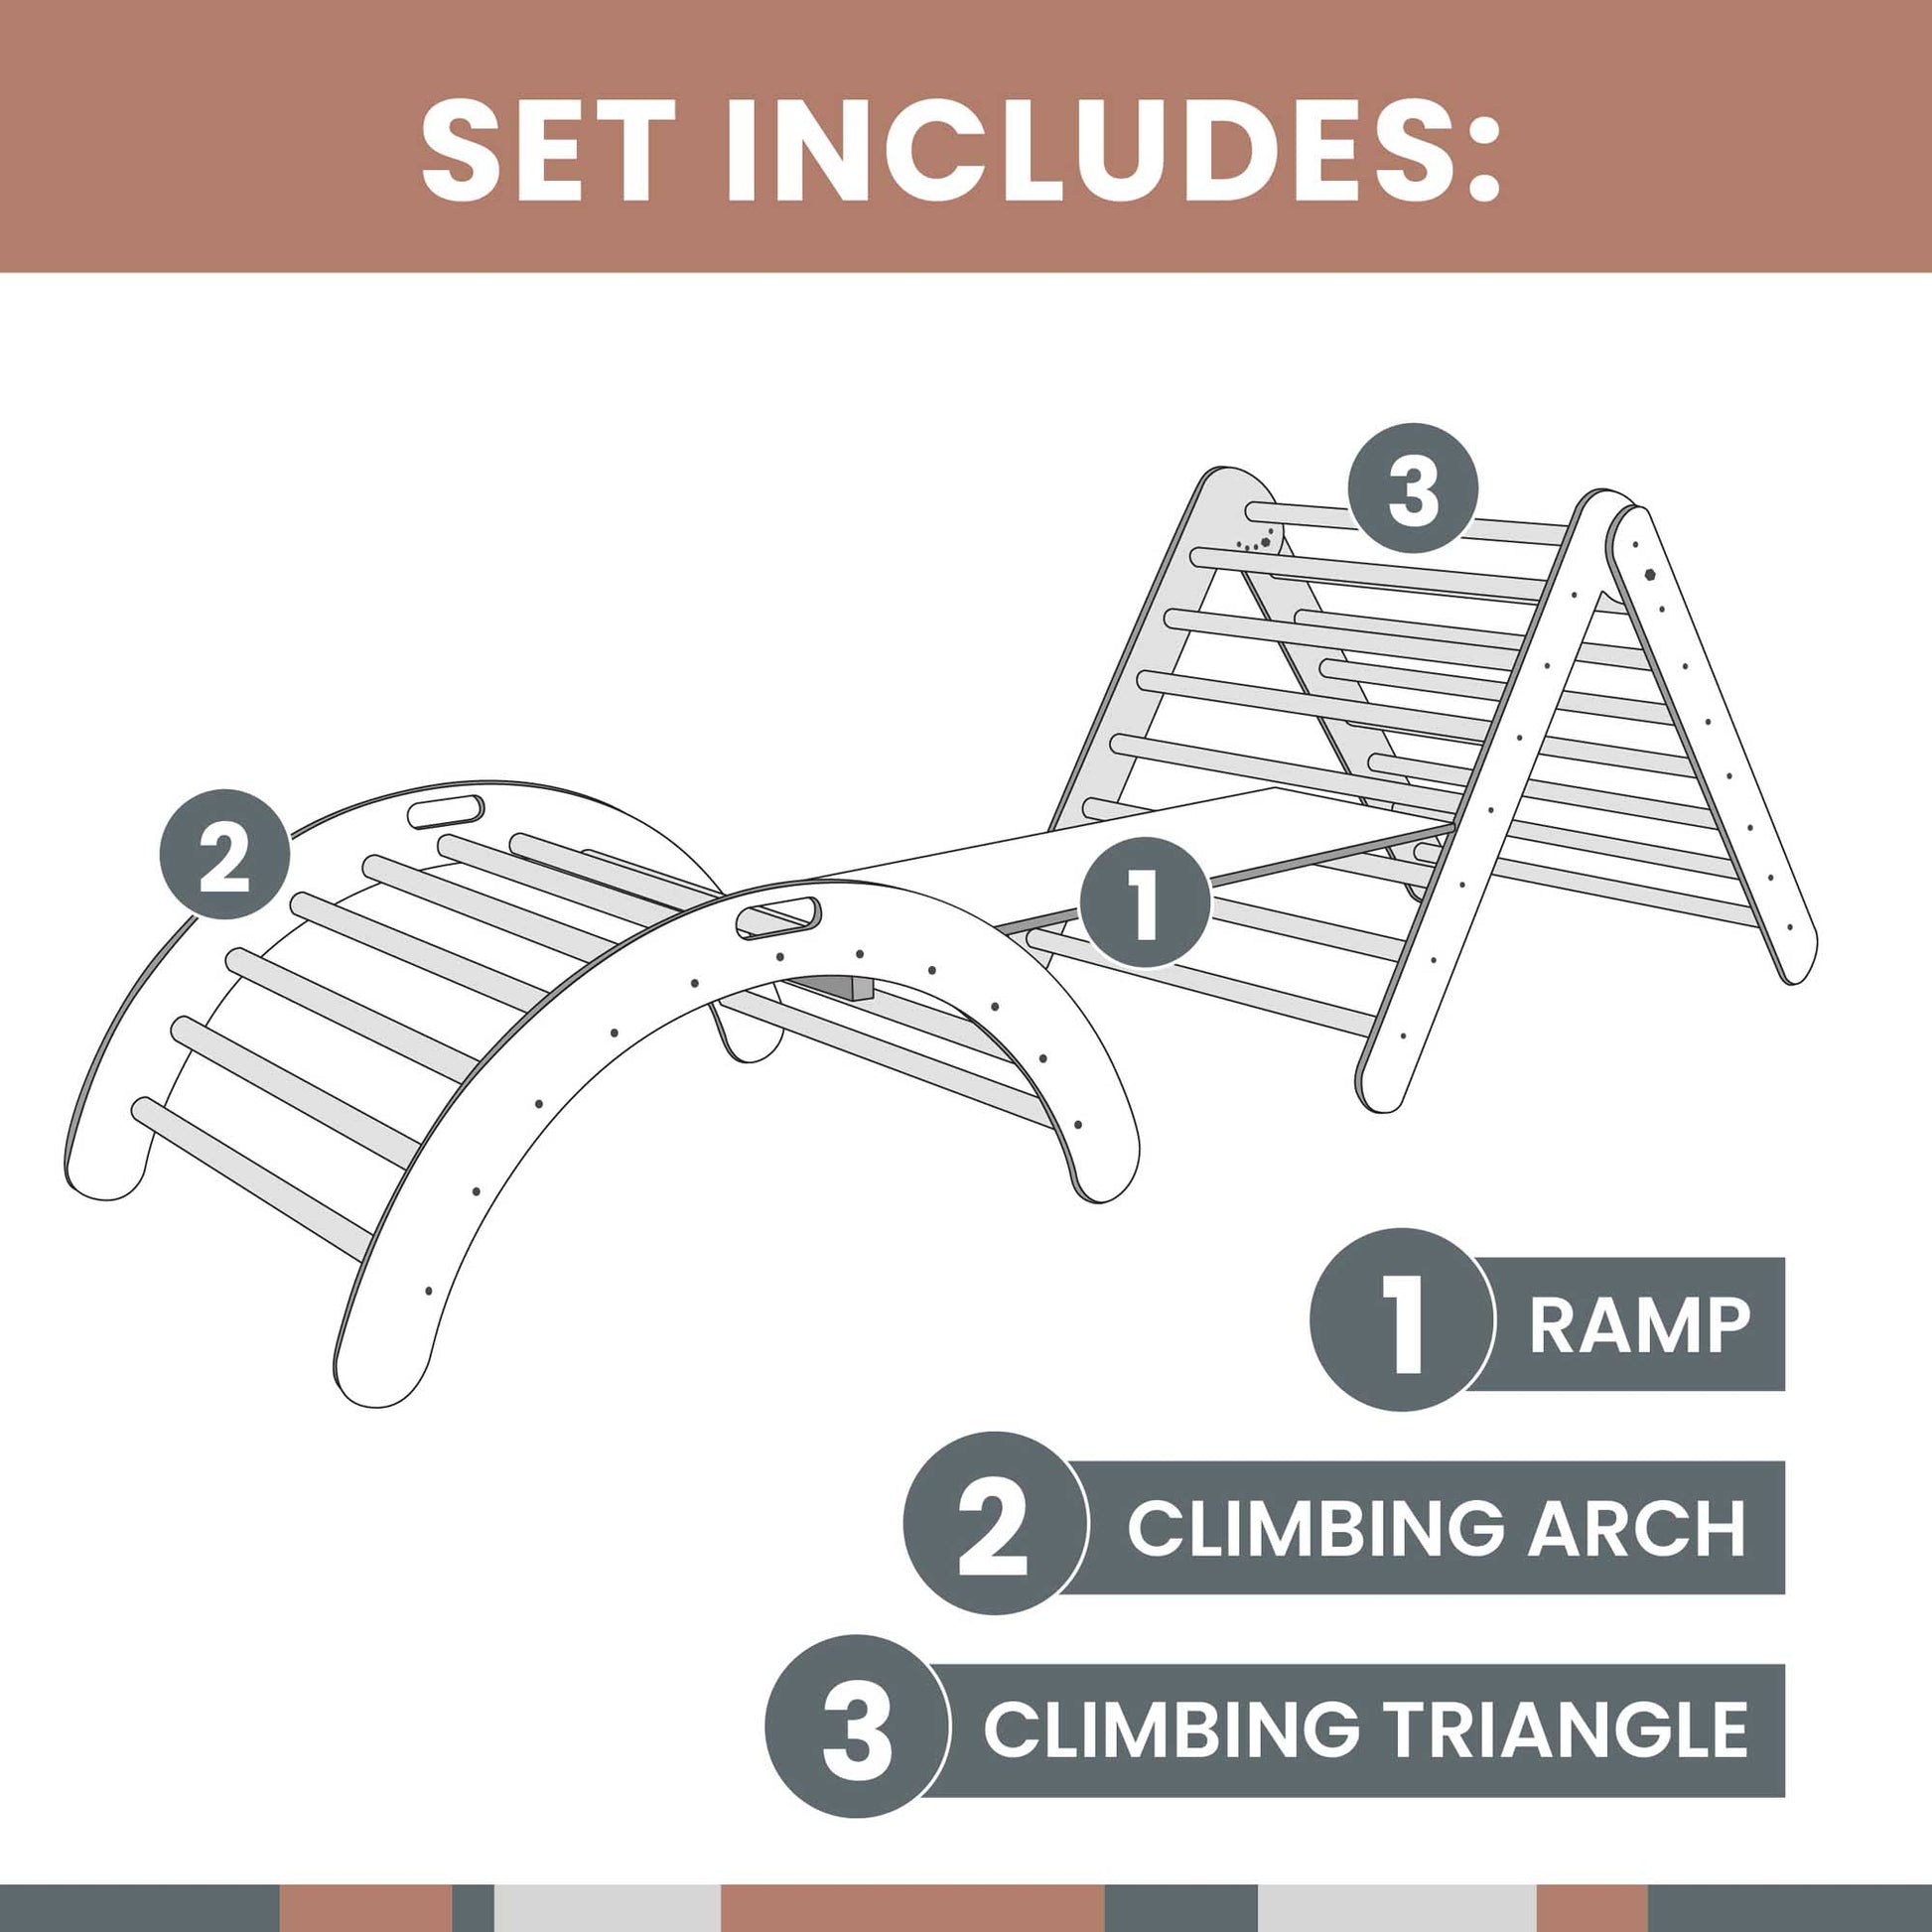 A set of instructions for the Sweet Home From Wood Climbing Arch + Foldable Climbing Triangle + a Ramp indoor climber and activity playset.